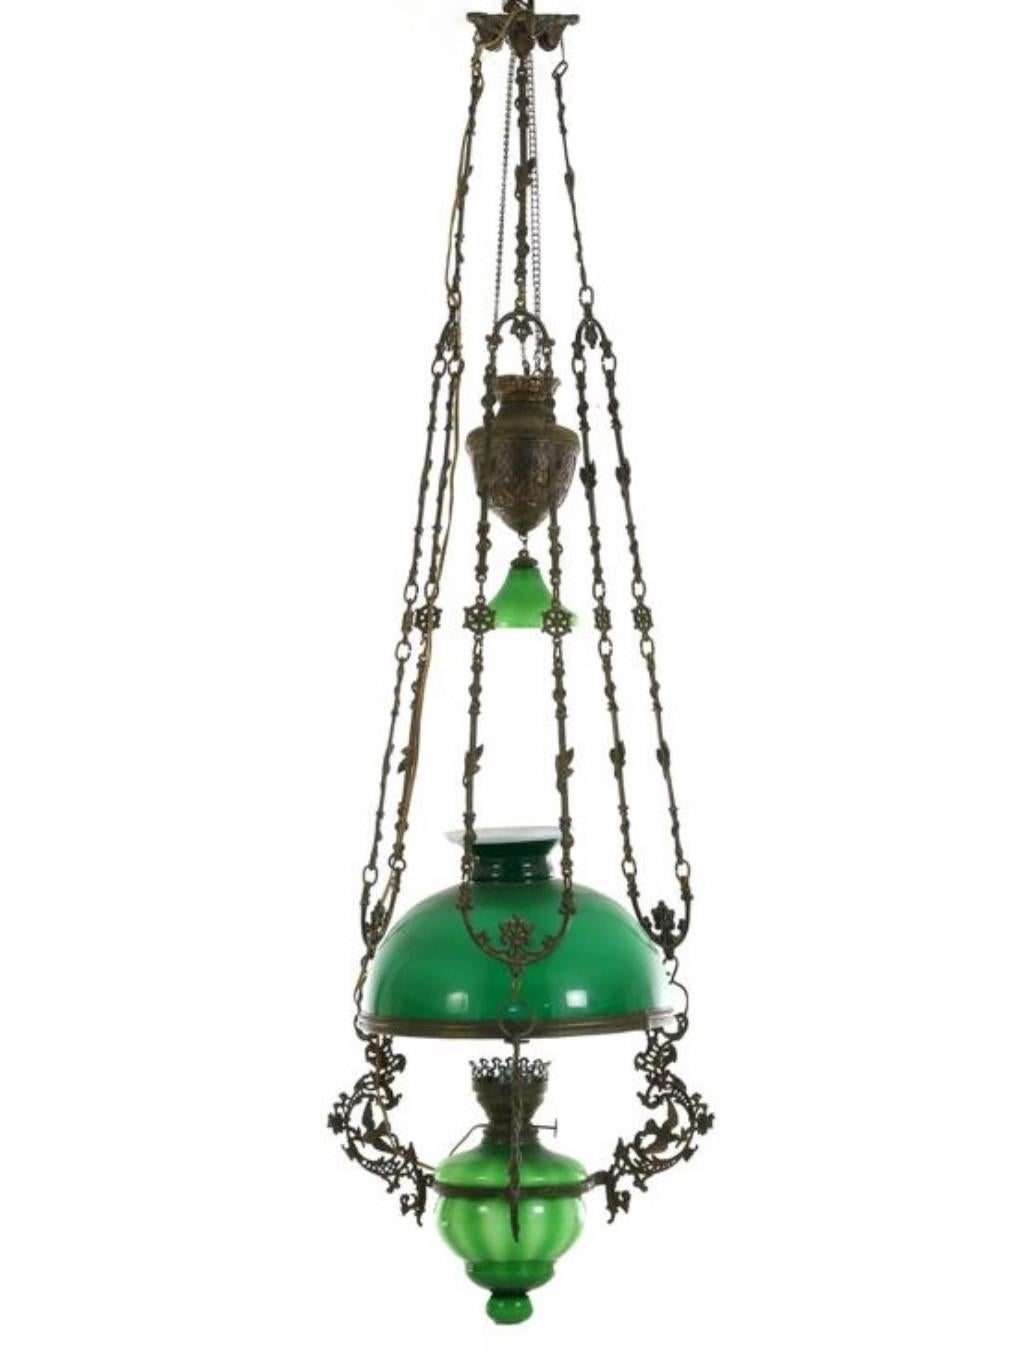 English Victorian Hanging Oil Lamp Converted to Electric Chandelier, England